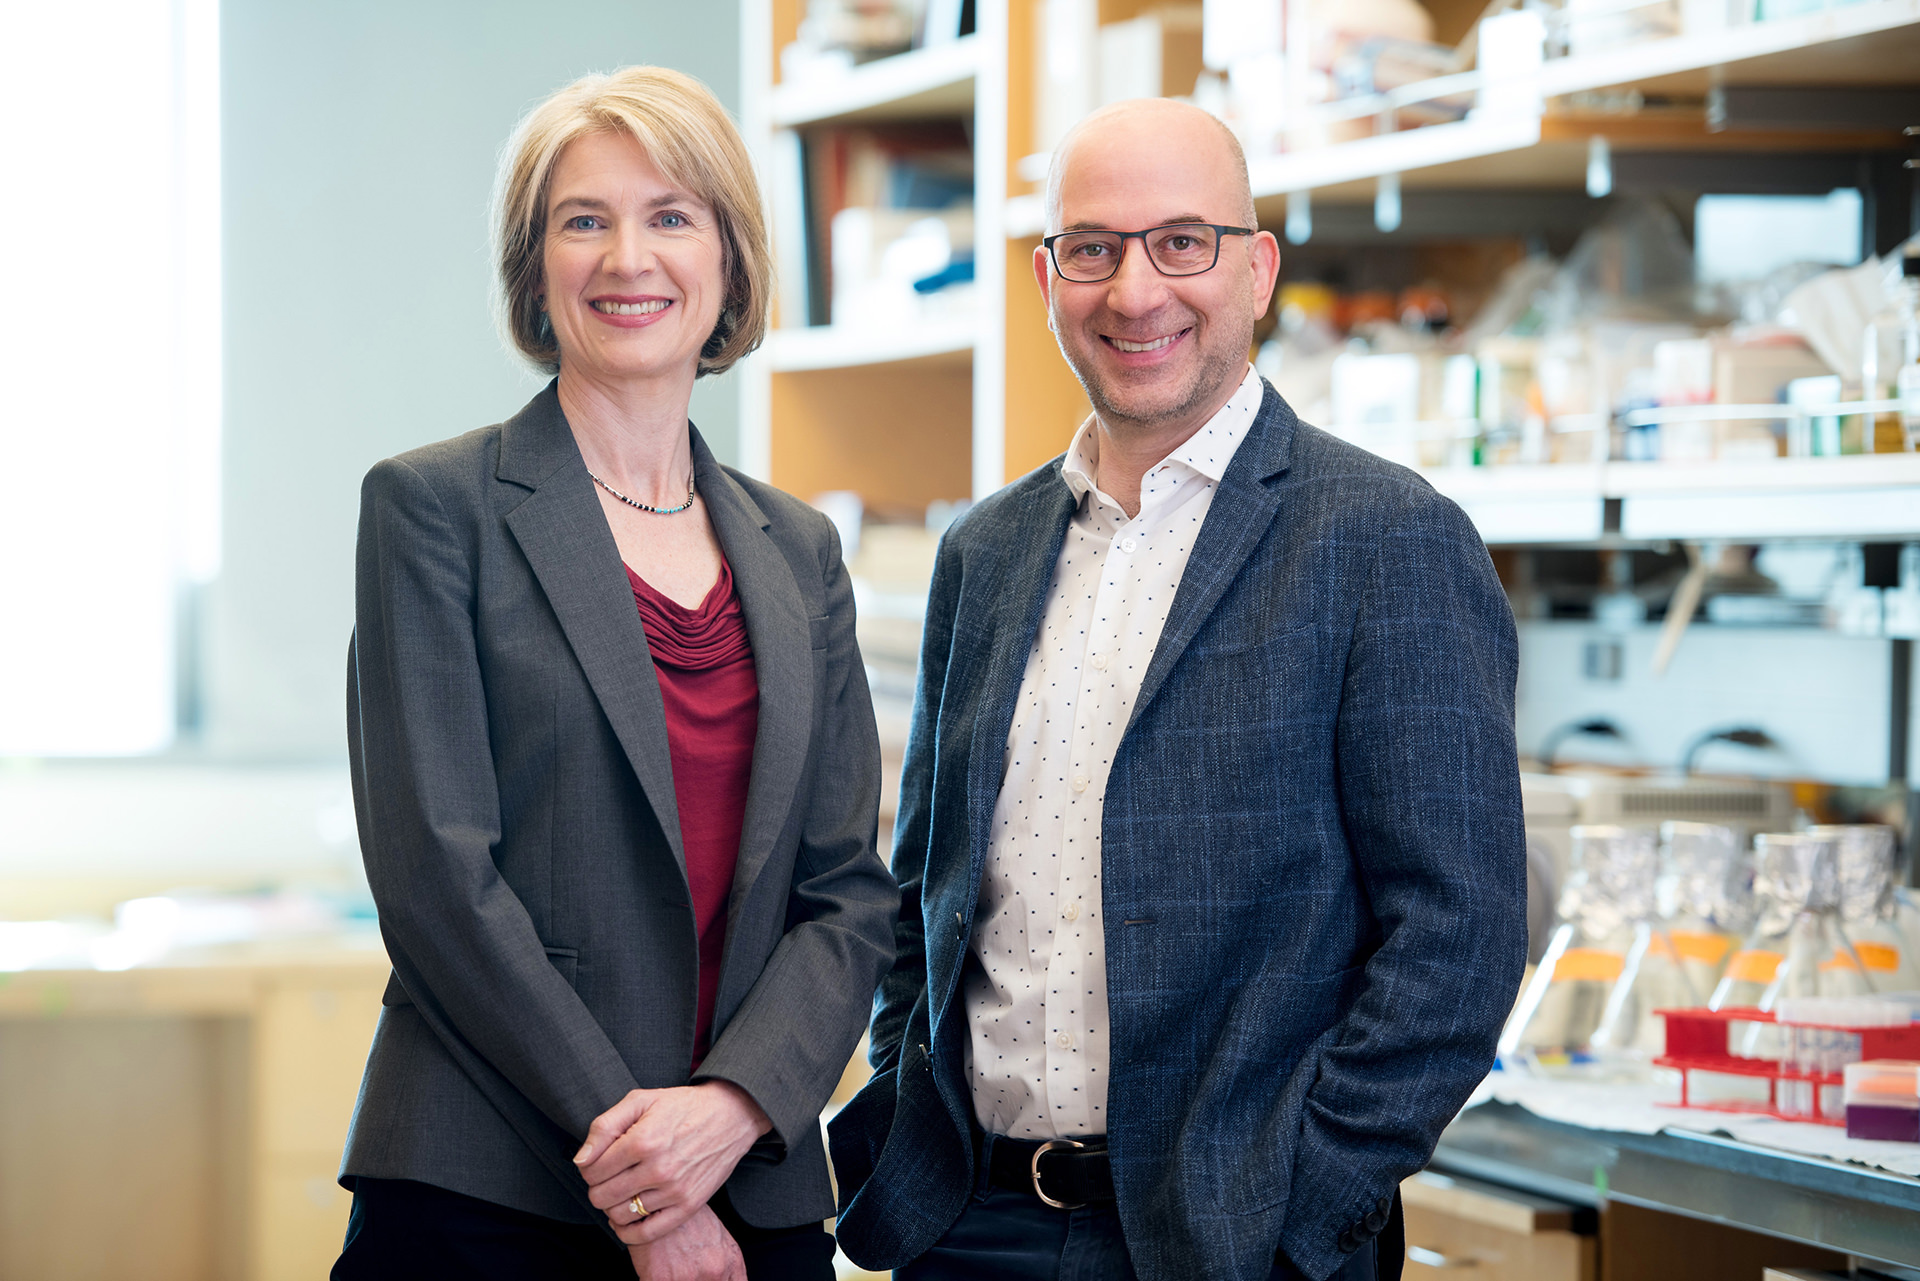 Image of Doudna and Weissman discussing CRISPR and LGR